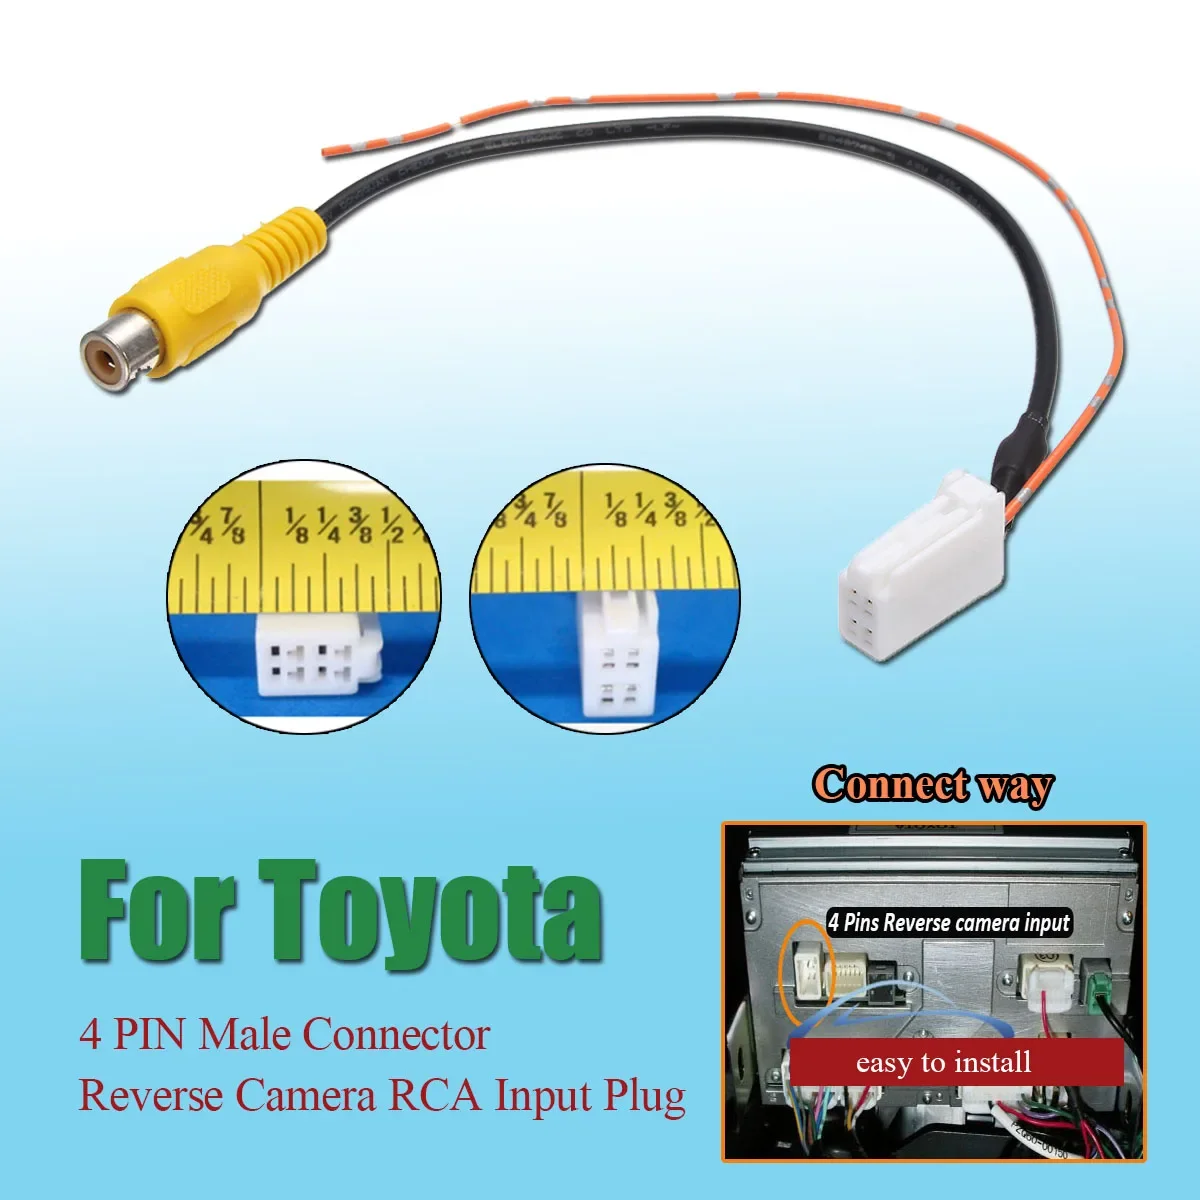 

For Toyota 4 Pin Male Connector Radio Back Up Reverse Camera RCA Input Plug Cable Adapter